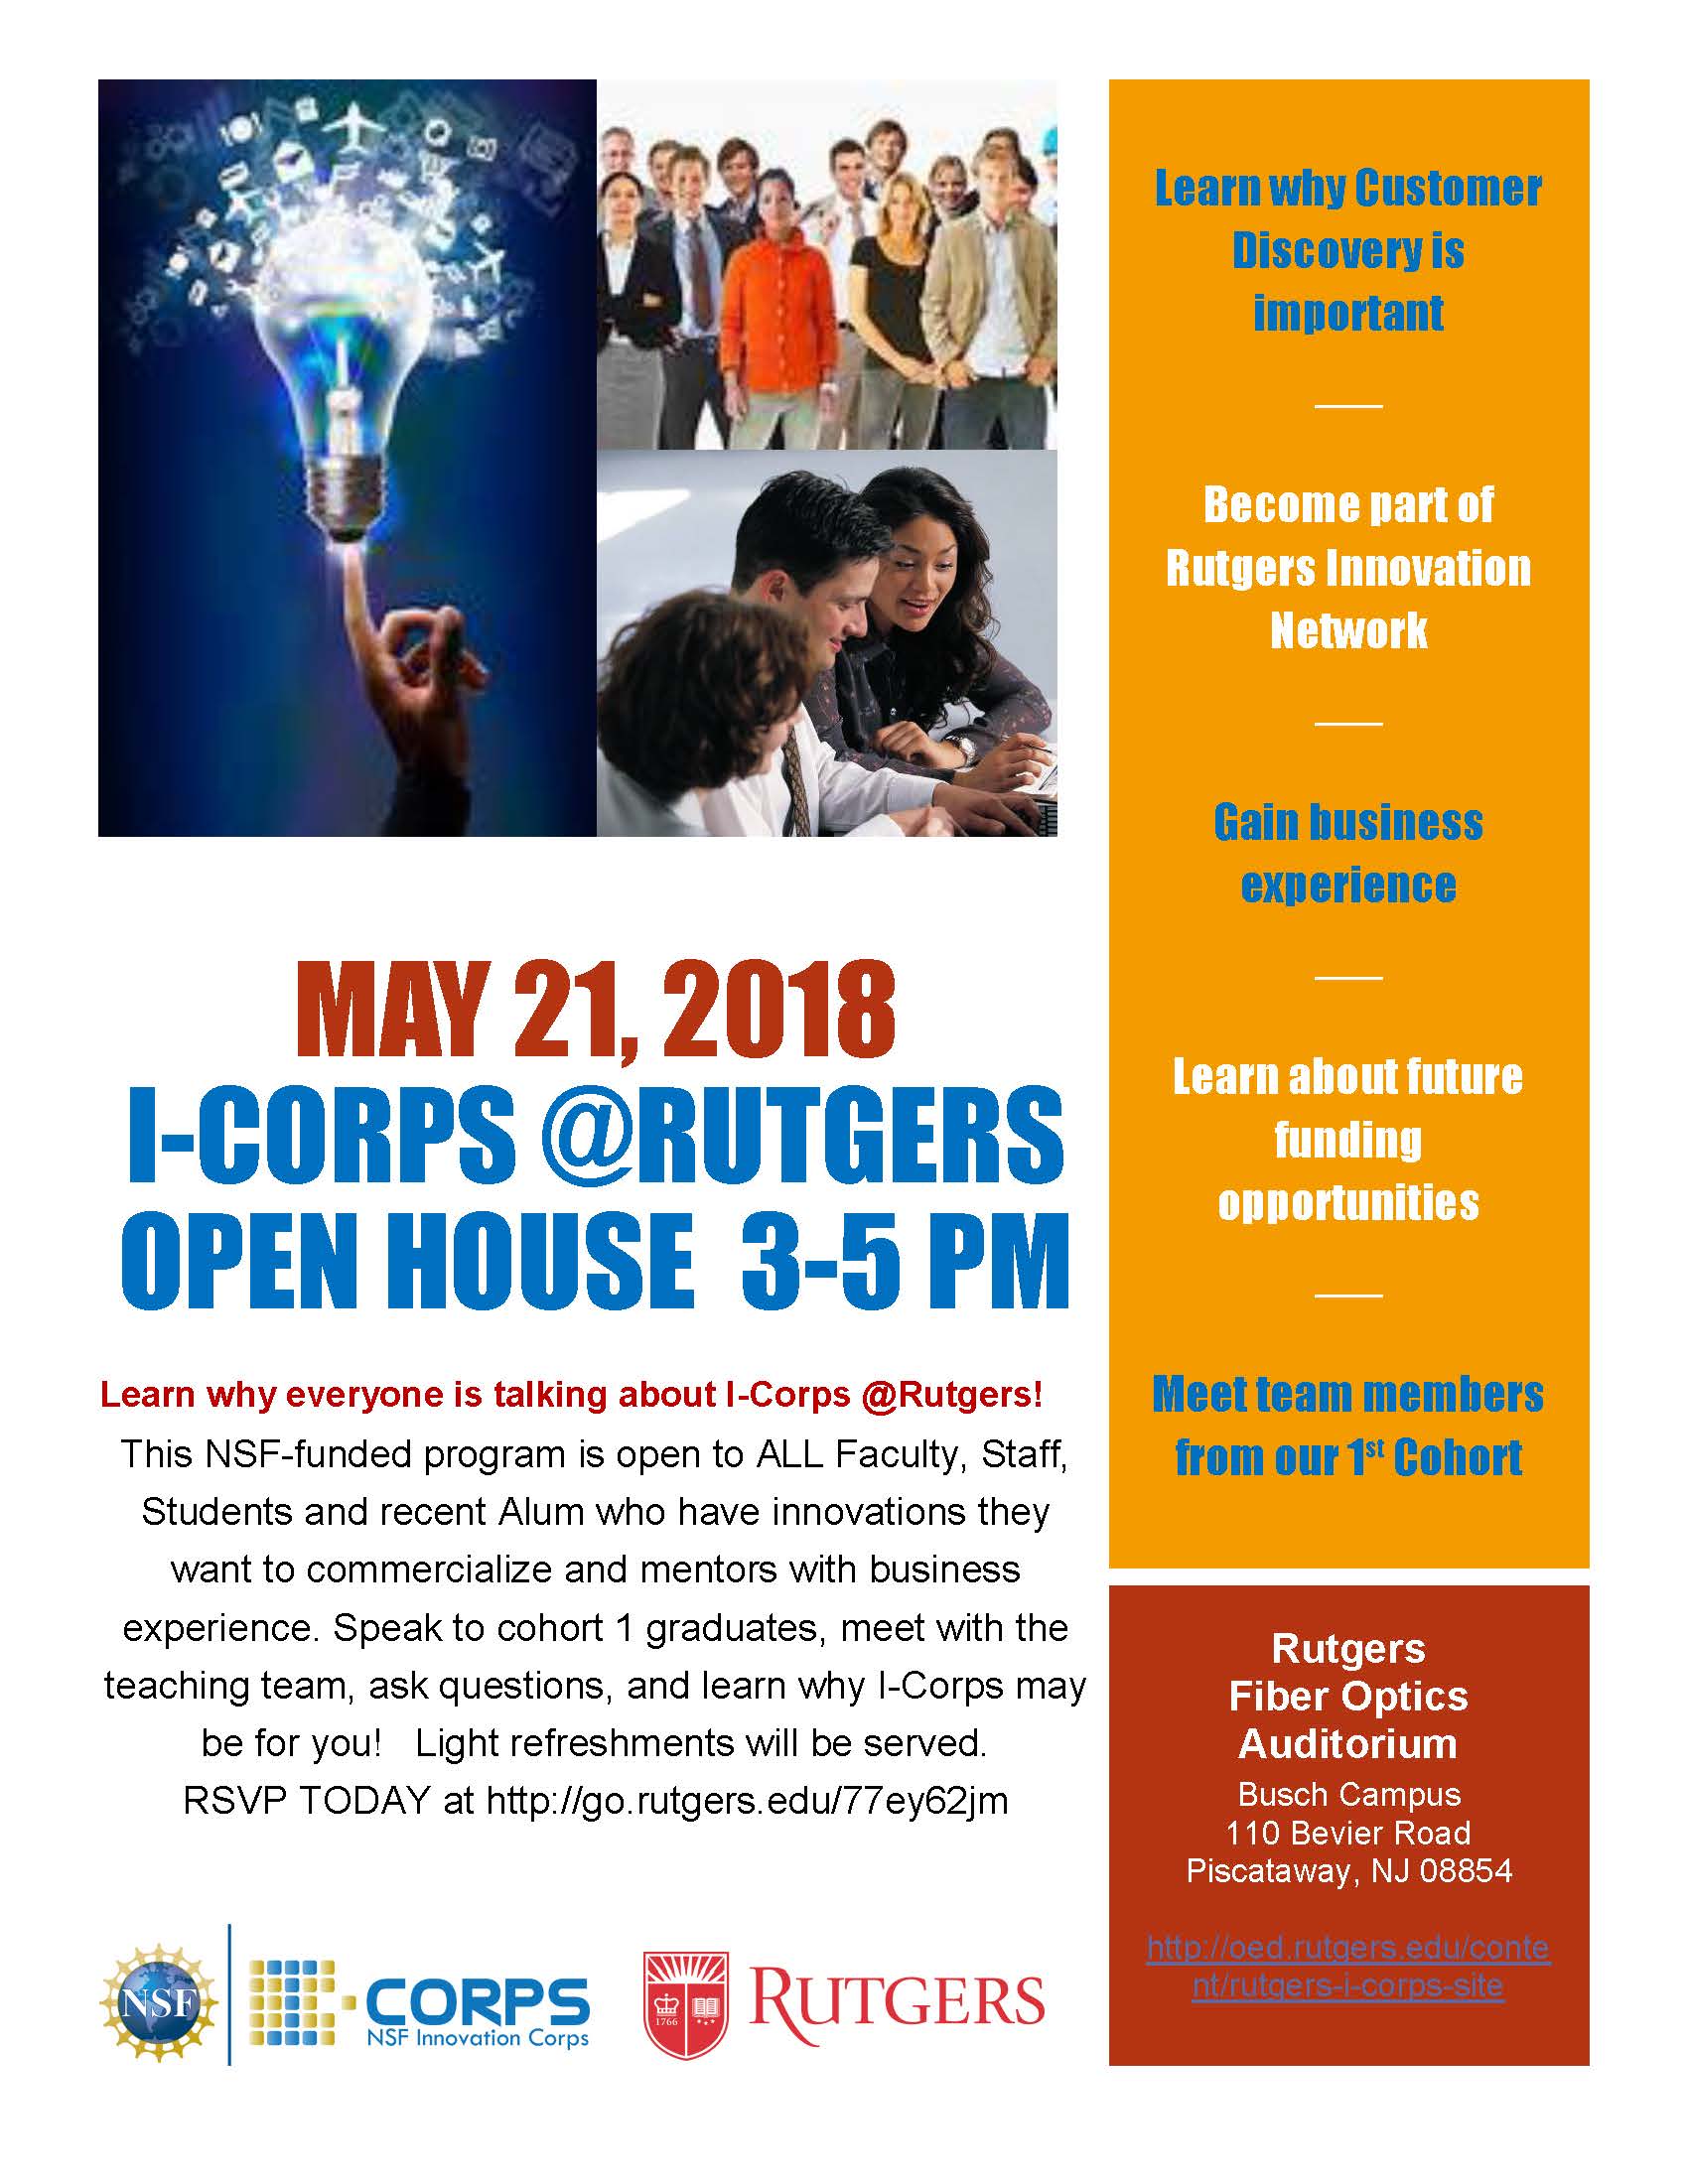 ICorps RUTGERS Open House May 21, 2018 3 to 5 PM EOHSI